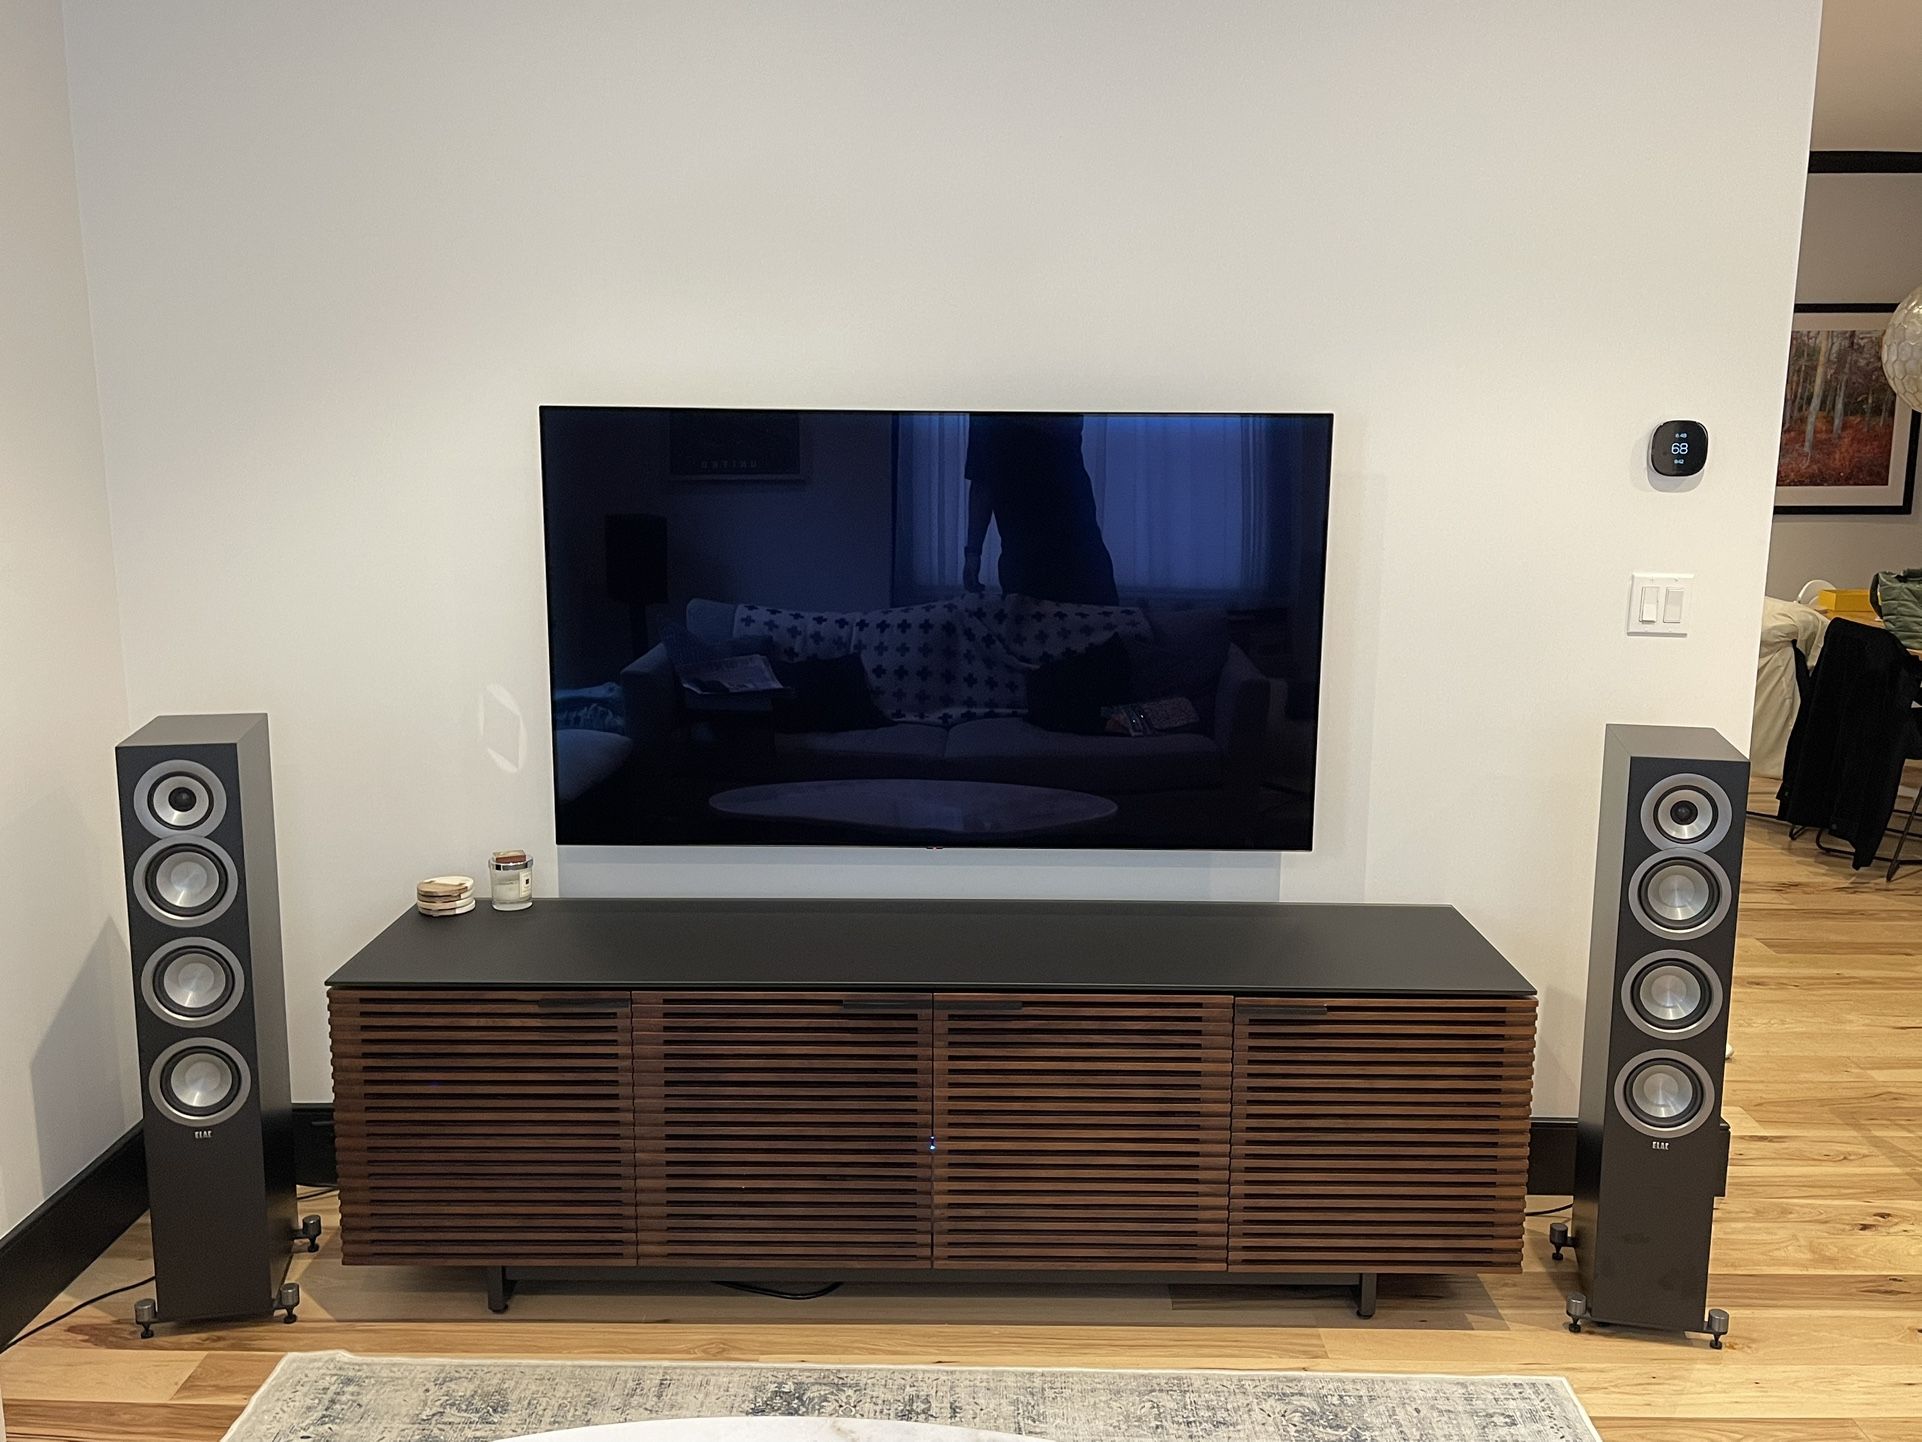 Home Theater 5.1 Receiver and Speakers, Denon, ELAC, SVS